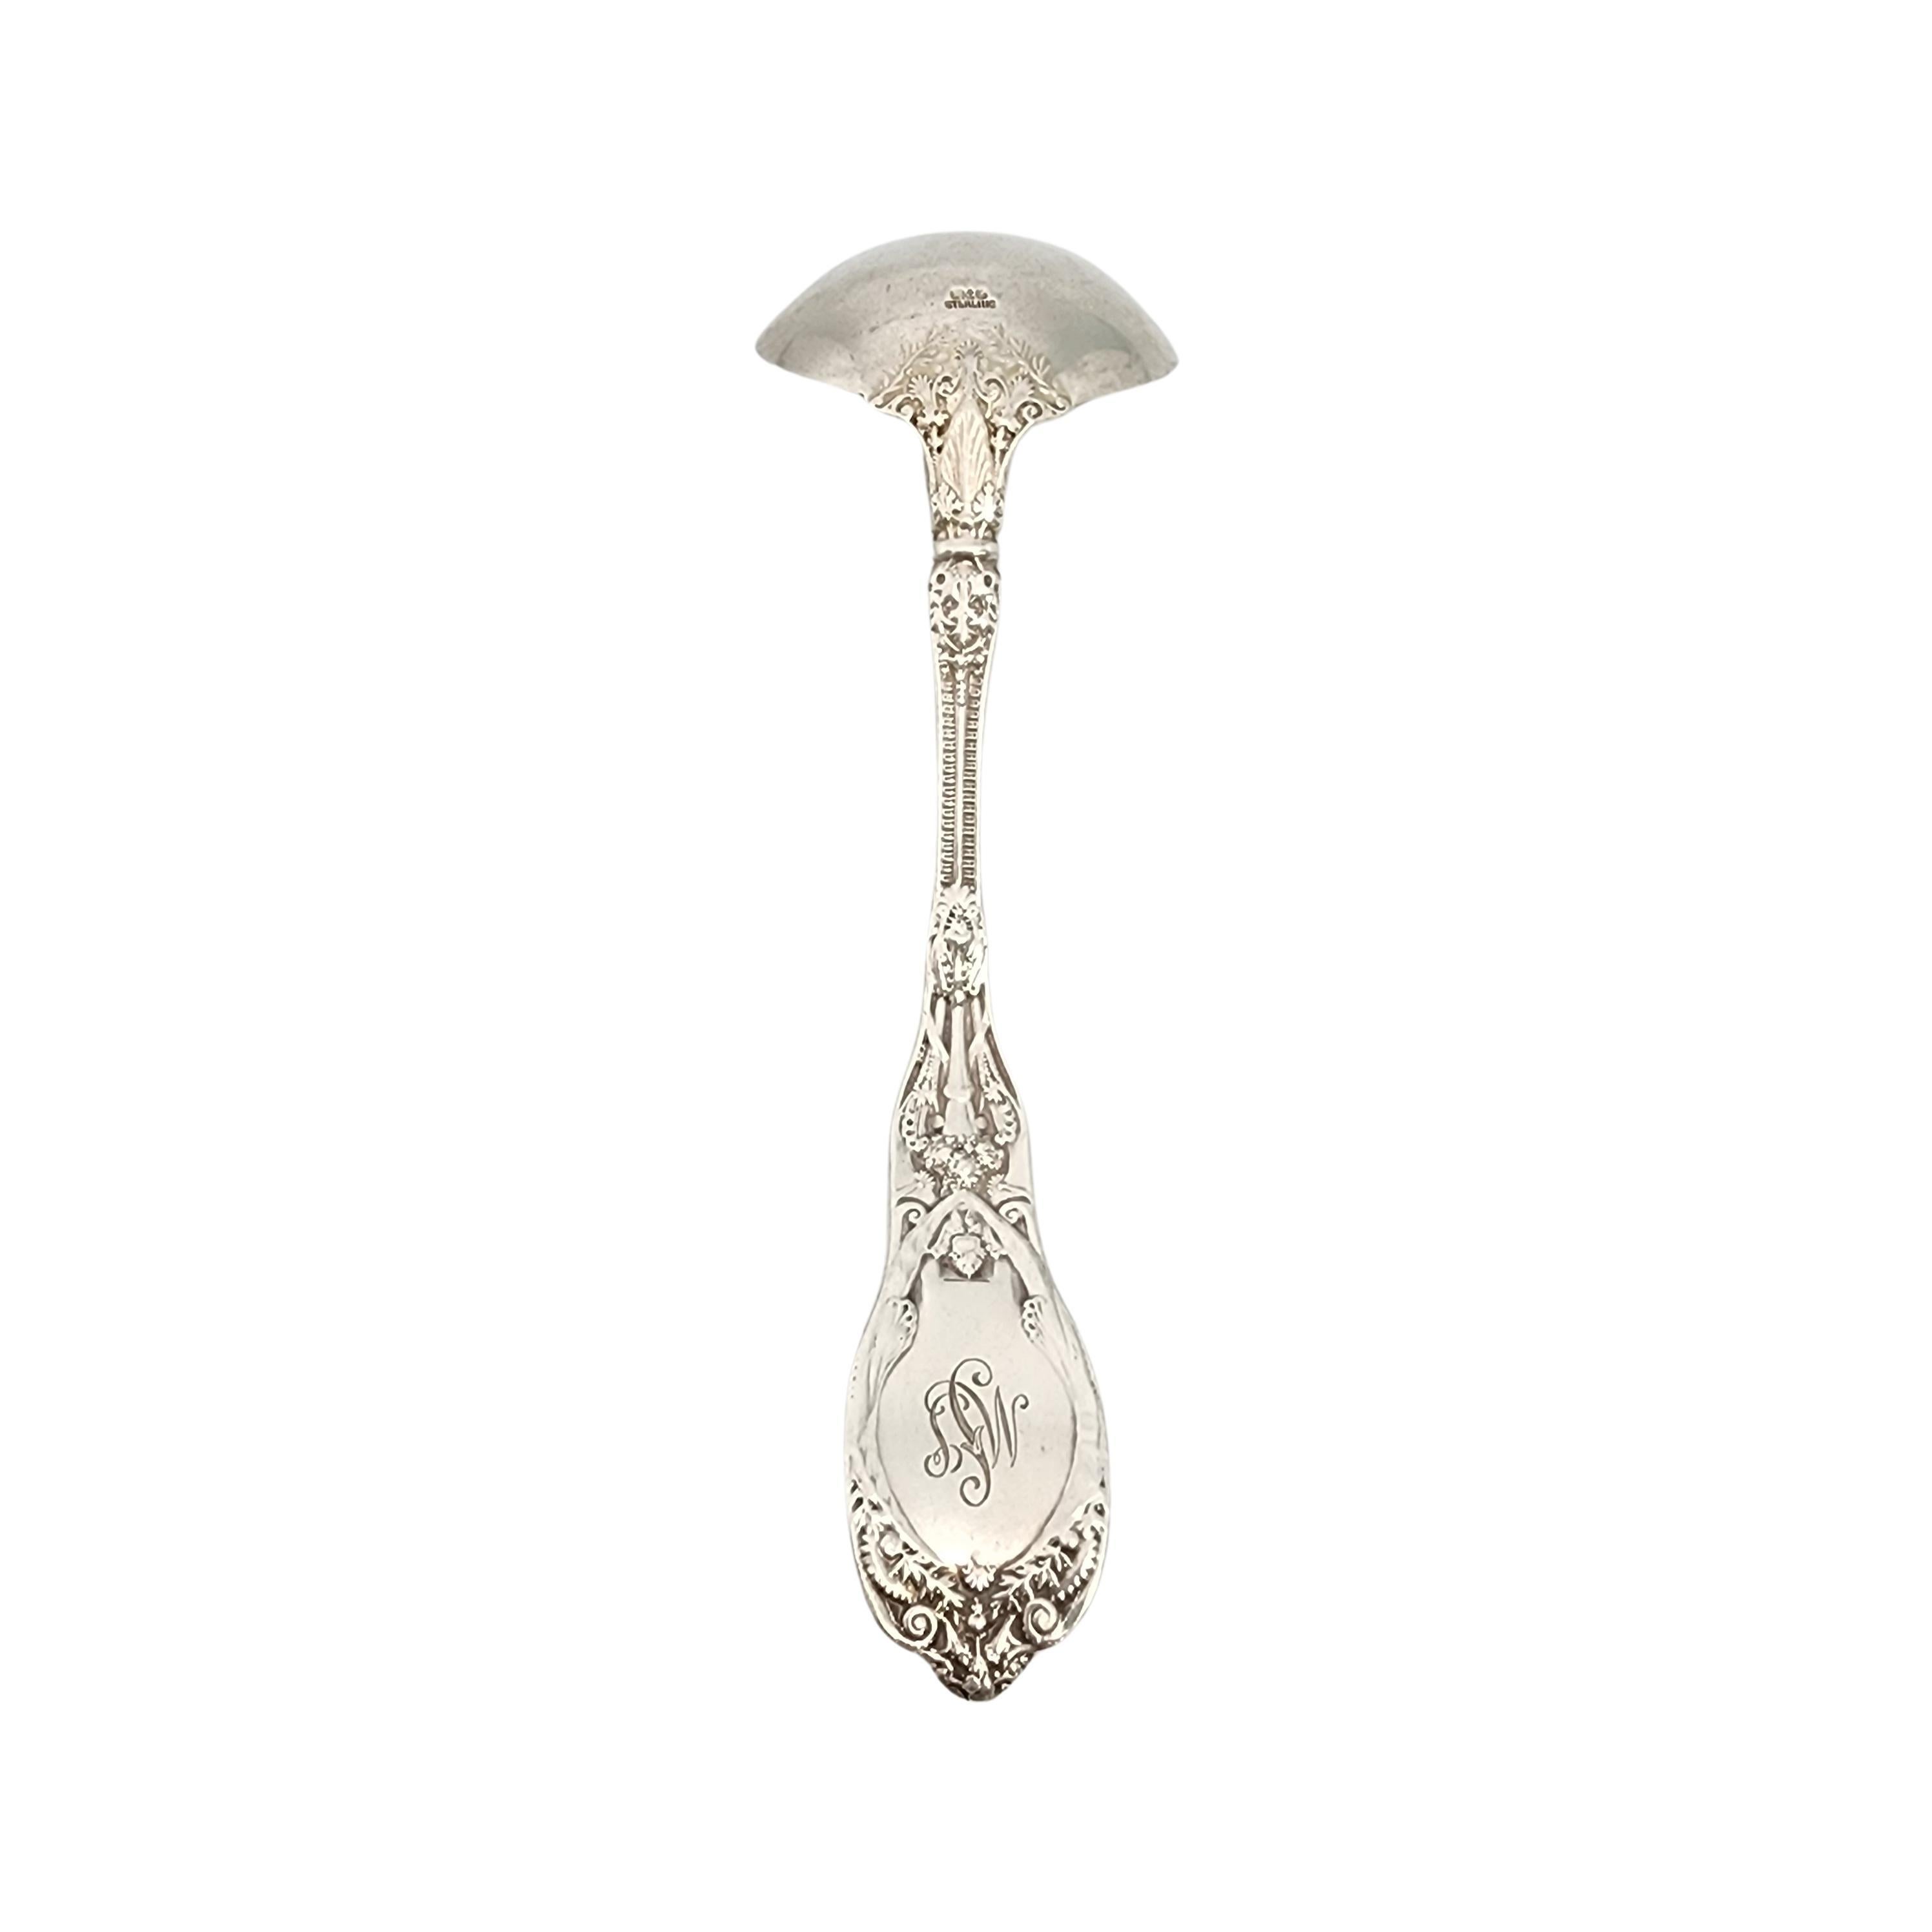 Antique sterling silver cream ladle in the Mythologique pattern by Gorham.

Monogram appears to be MSJ (see photo).

Designed by F. Antoine Heller in 1894, Gorham's Mythologique pattern is an intricate, multi-motif pattern that ornately depicts